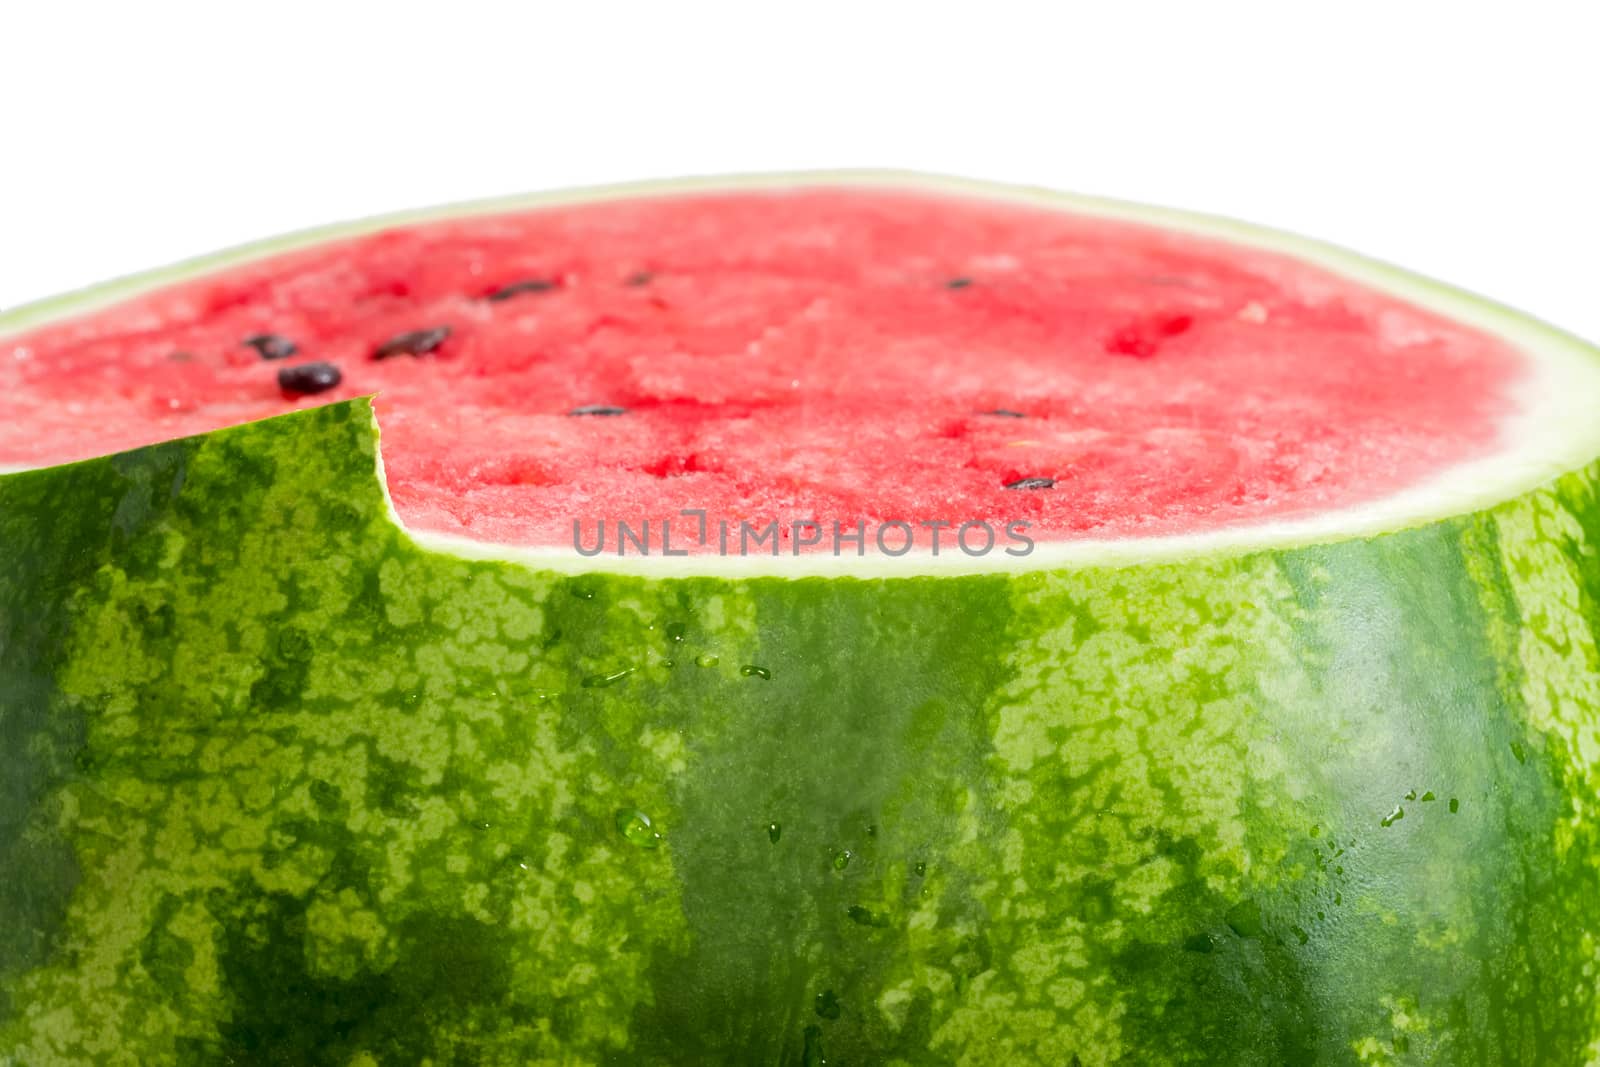 Fragment of the watermelon with green striped rind and deep red flesh with partially cut upper part closeup at shallow depth of field on a white background
